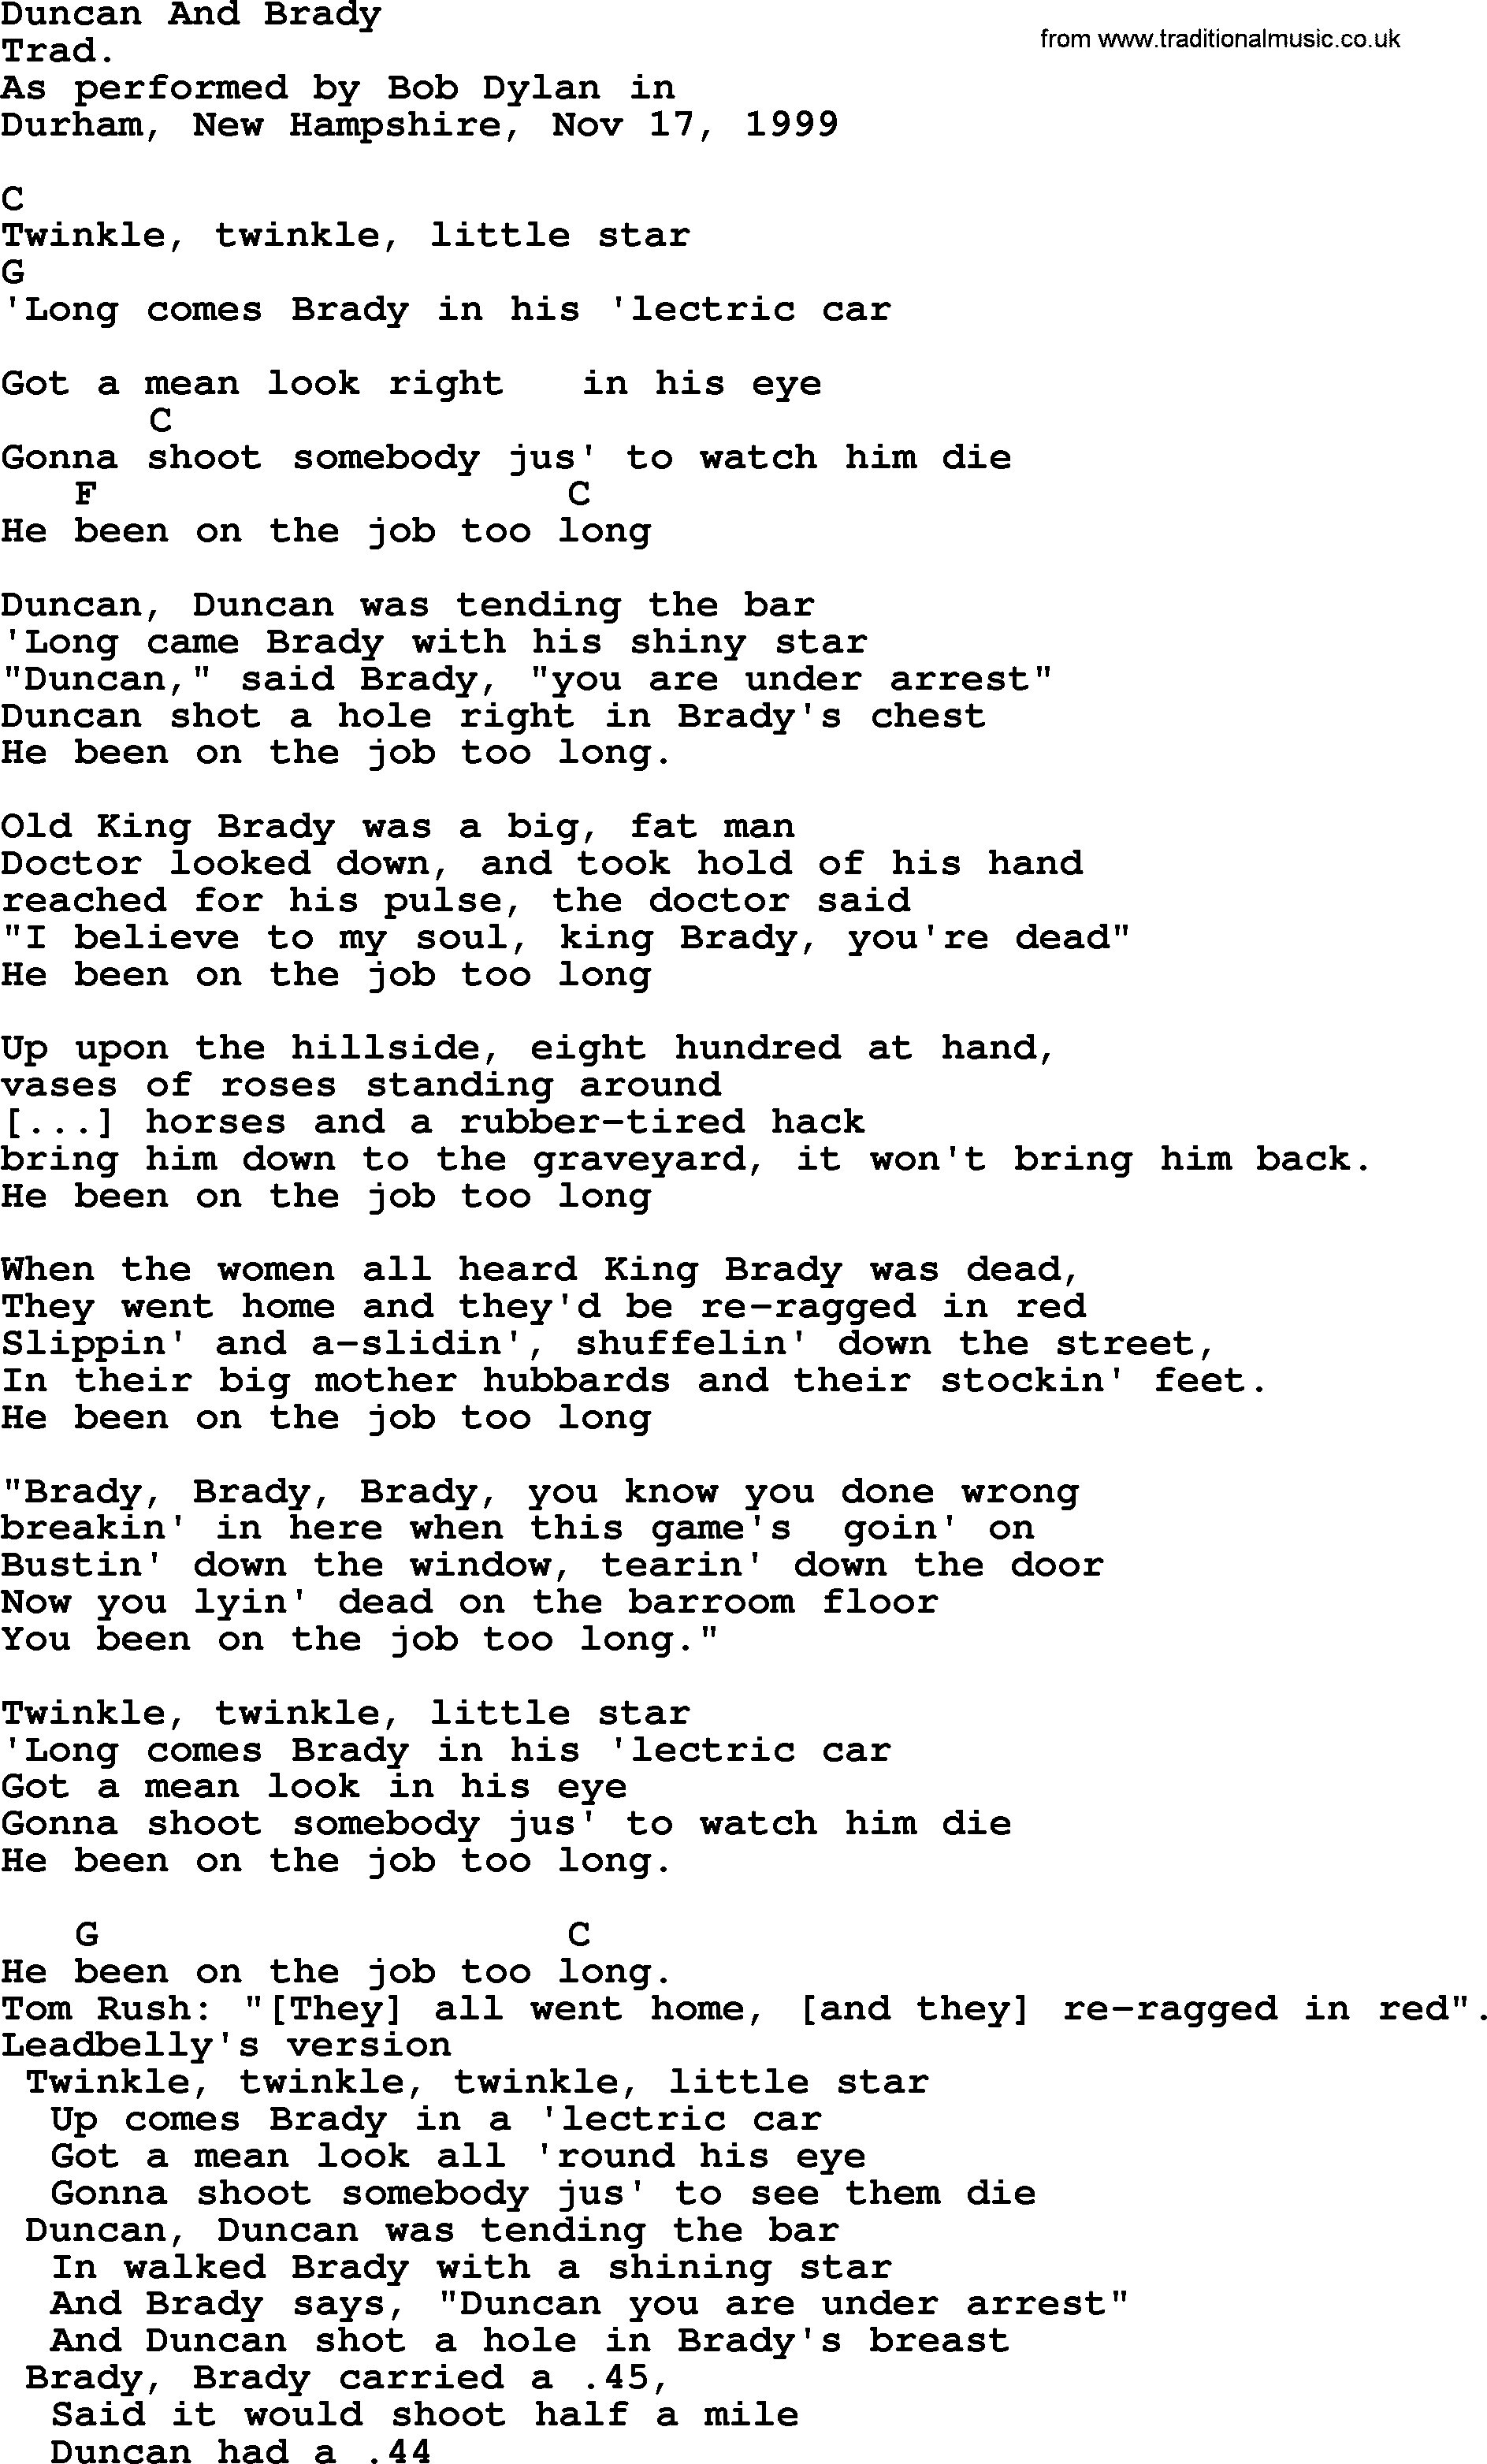 Bob Dylan song, lyrics with chords - Duncan And Brady